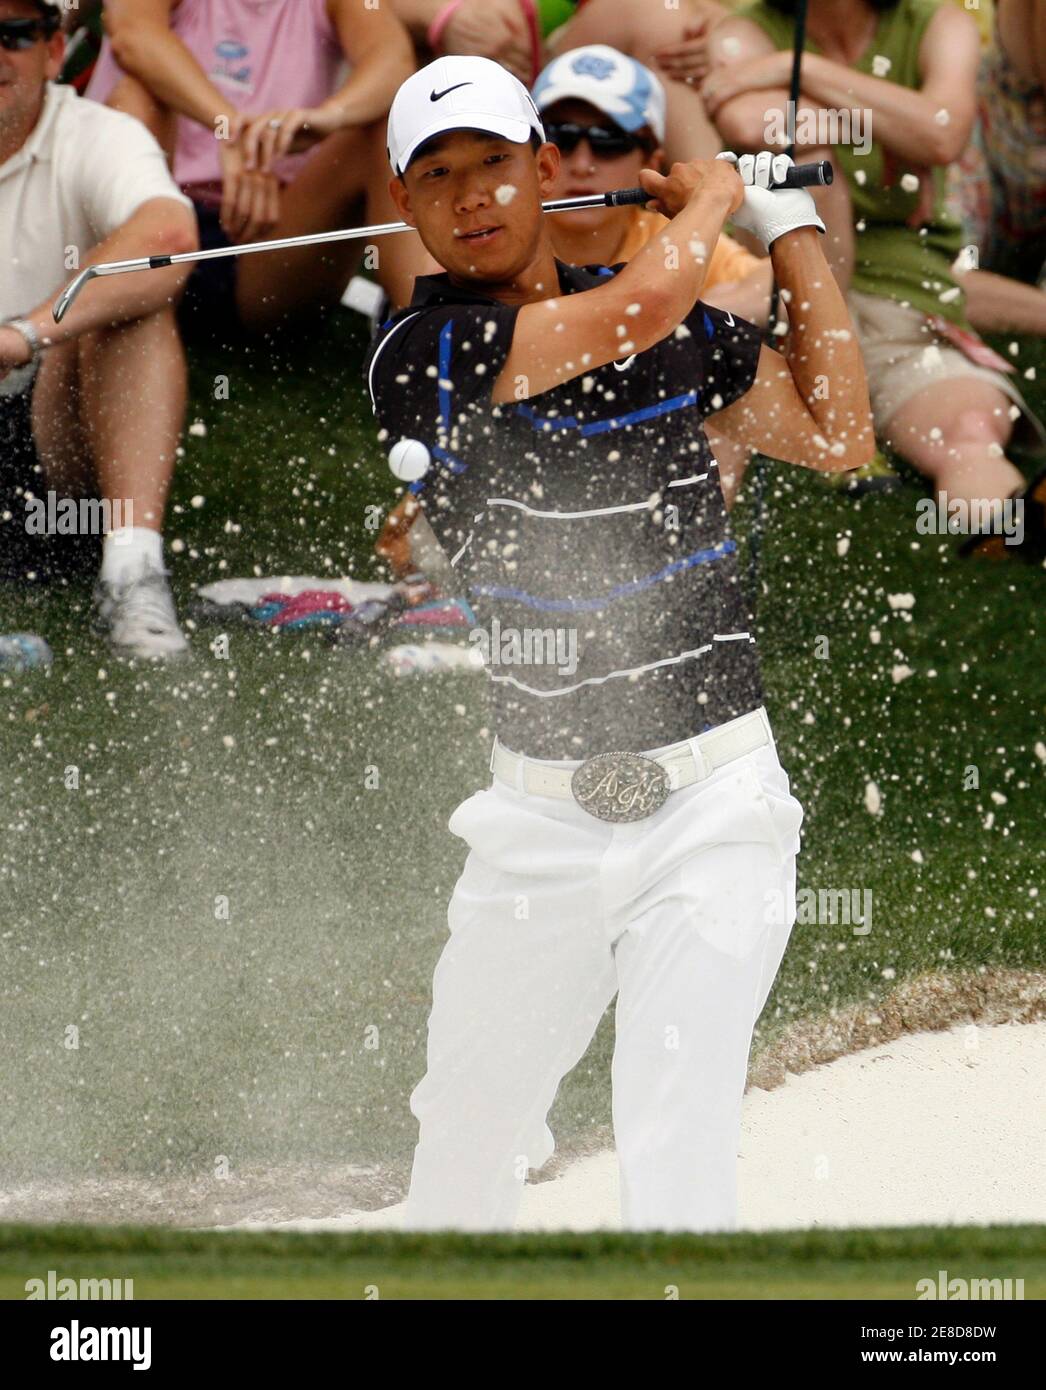 Anthony Kim of the U.S. hits from the bunker at the second hole during the final round of the Quail Hollow Championship in Charlotte, North Carolina May 2, 2010. REUTERS/Jason Miczek (UNITED STATES - Tags: SPORT GOLF) Stock Photo